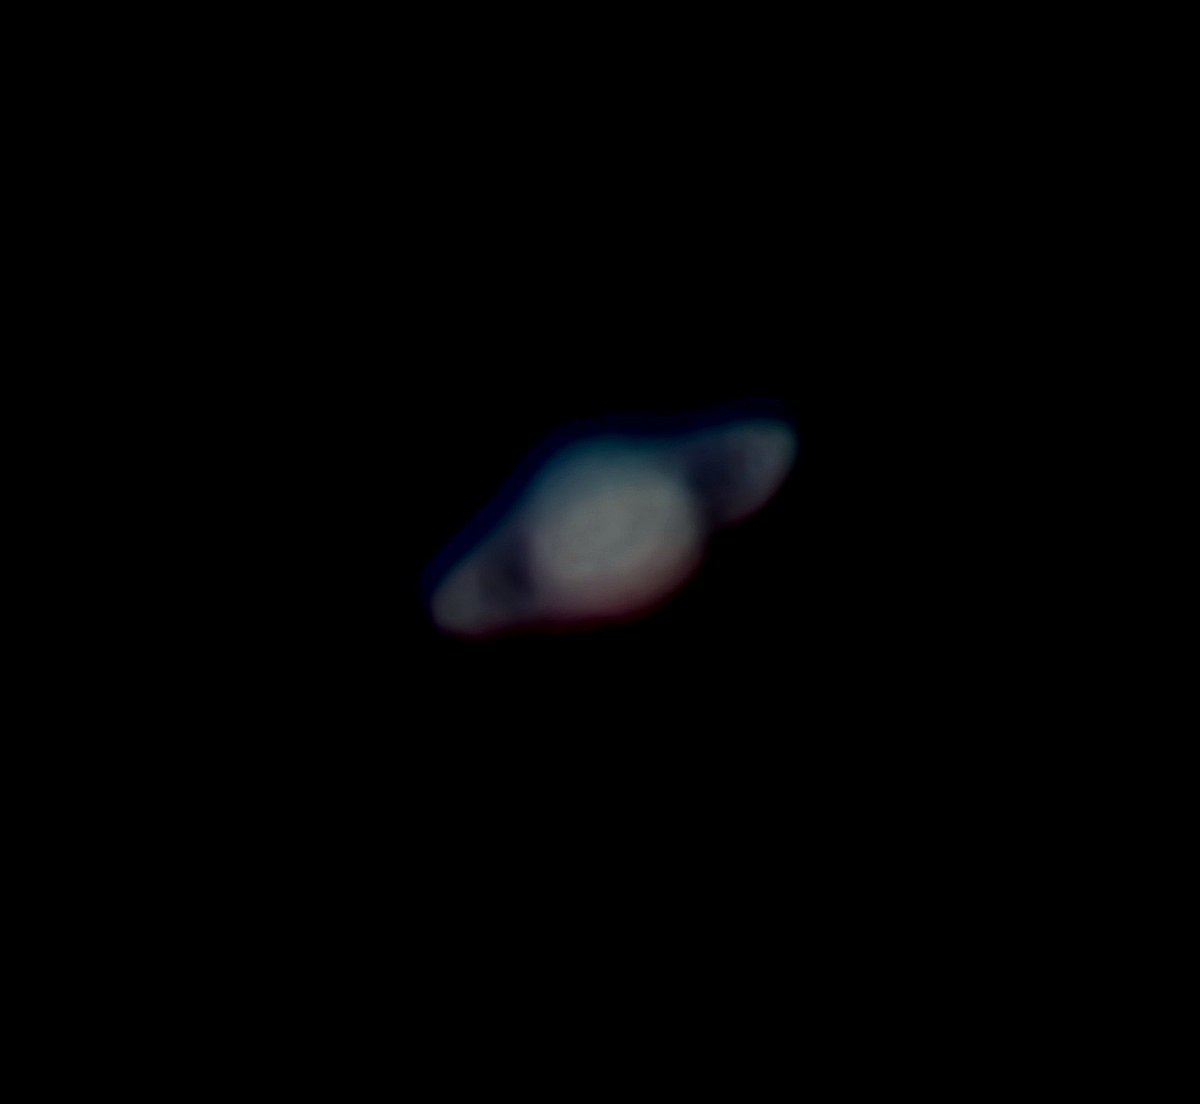 Saturn 30 minutes ago from my telescope. Not bad for a cloudy-ish night.